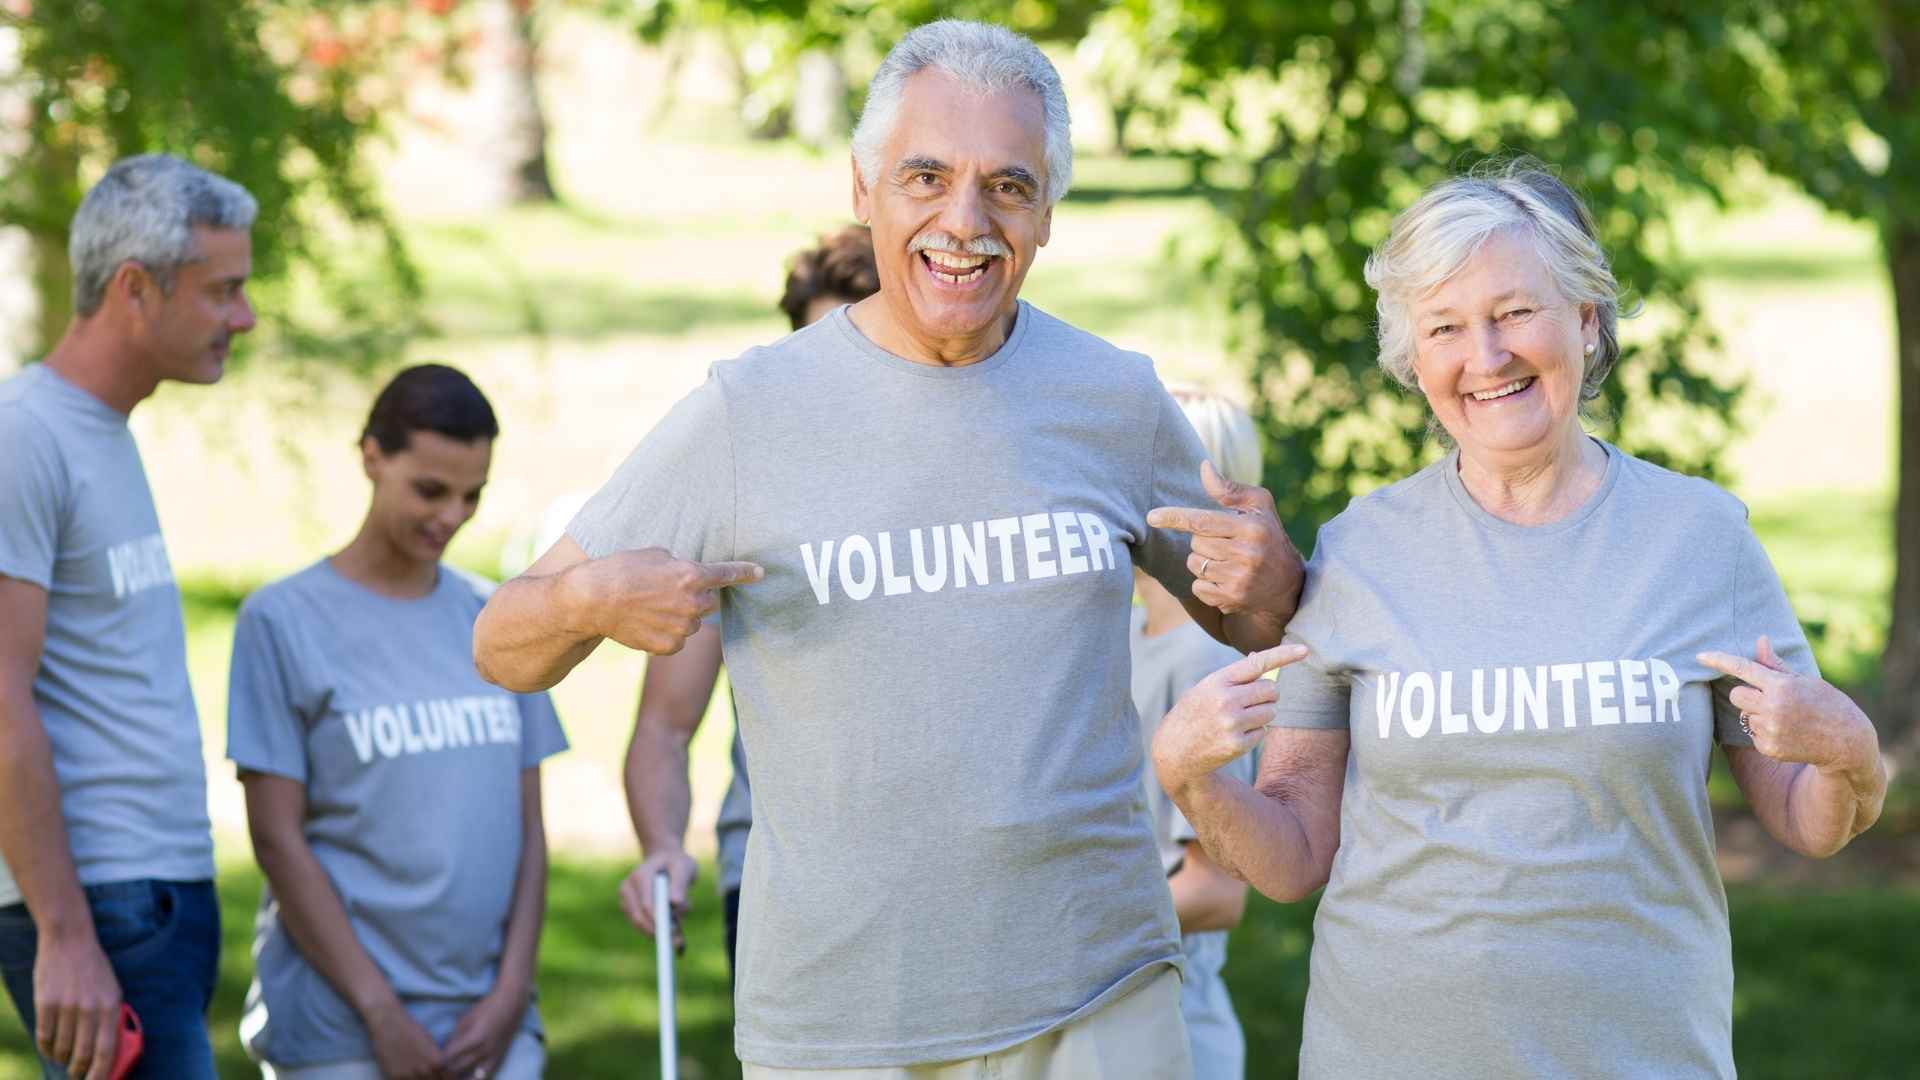 Fellowship Square is all about helping their residents live a fulfilling life in their Golden Years. Oftentimes, this means helping them get involved in activities or the church or engaging them in community outreach. Volunteering can be a wonderful way for seniors to fulfilled. But one simple way they can also get this feel-good feeling is through small acts of kindness and paying those “feel-goods” forward.  What is paying it forward, really? It can be the seemingly smallest and simplest gesture that can create a wave of kindness and good deeds — all which leave both parties with that feel good feeling. What’s not to love about that? When one kind act inspires another, paying it forward can spread in limitless ways.   One simple way that seniors can pay it forward (and help declutter their homes in one fell swoop) is by donating items they no longer need or passing down heirlooms to their next of kin. Children and grandchildren are sure to cherish significant pieces of furniture, China, jewelry that hold sentimental value within the family. And items that can no longer be used within the family can be donated and serve another purpose to those in need. This type of paying it forward also allows seniors to clear their homes of things they no longer use or that don’t fit into a downsized space while doing something good for others.  Helping a neighbor is another great way to pay it forward. Seniors that still have the ability to drive could offer to take a neighbor to do their groceries or drop them off at and pick them up from a doctor’s appointment. For someone whose ability to drive, this may not be a big deal, but it is certain to mean a lot to a senior who no longer drives. Or a senior could offer to help a neighbor clean up with yard (pull weeds or rake leaves) or simply bring their newspaper to their doorstep for them.   Little gestures can have a big impact. Finding ways to help others can be a wonderful way for seniors to find purpose and joy in their lives every single day. Paying it forward doesn’t even have to cost a thing. A compliment to a stranger or a kind text to a friend or loved one is likely to be remembered long after a gift might, and these are great ways to start a new friendship or rekindle a bond.  Research even shows that paying it forward and acts of kindness are good for one’s health! Paying it forward can help relieve stress, improve quality of life, contribute to one’s happiness, help develop connection with others and build strong relationships and more. So why not get into the spirit of goodwill towards others starting with a small gesture today?